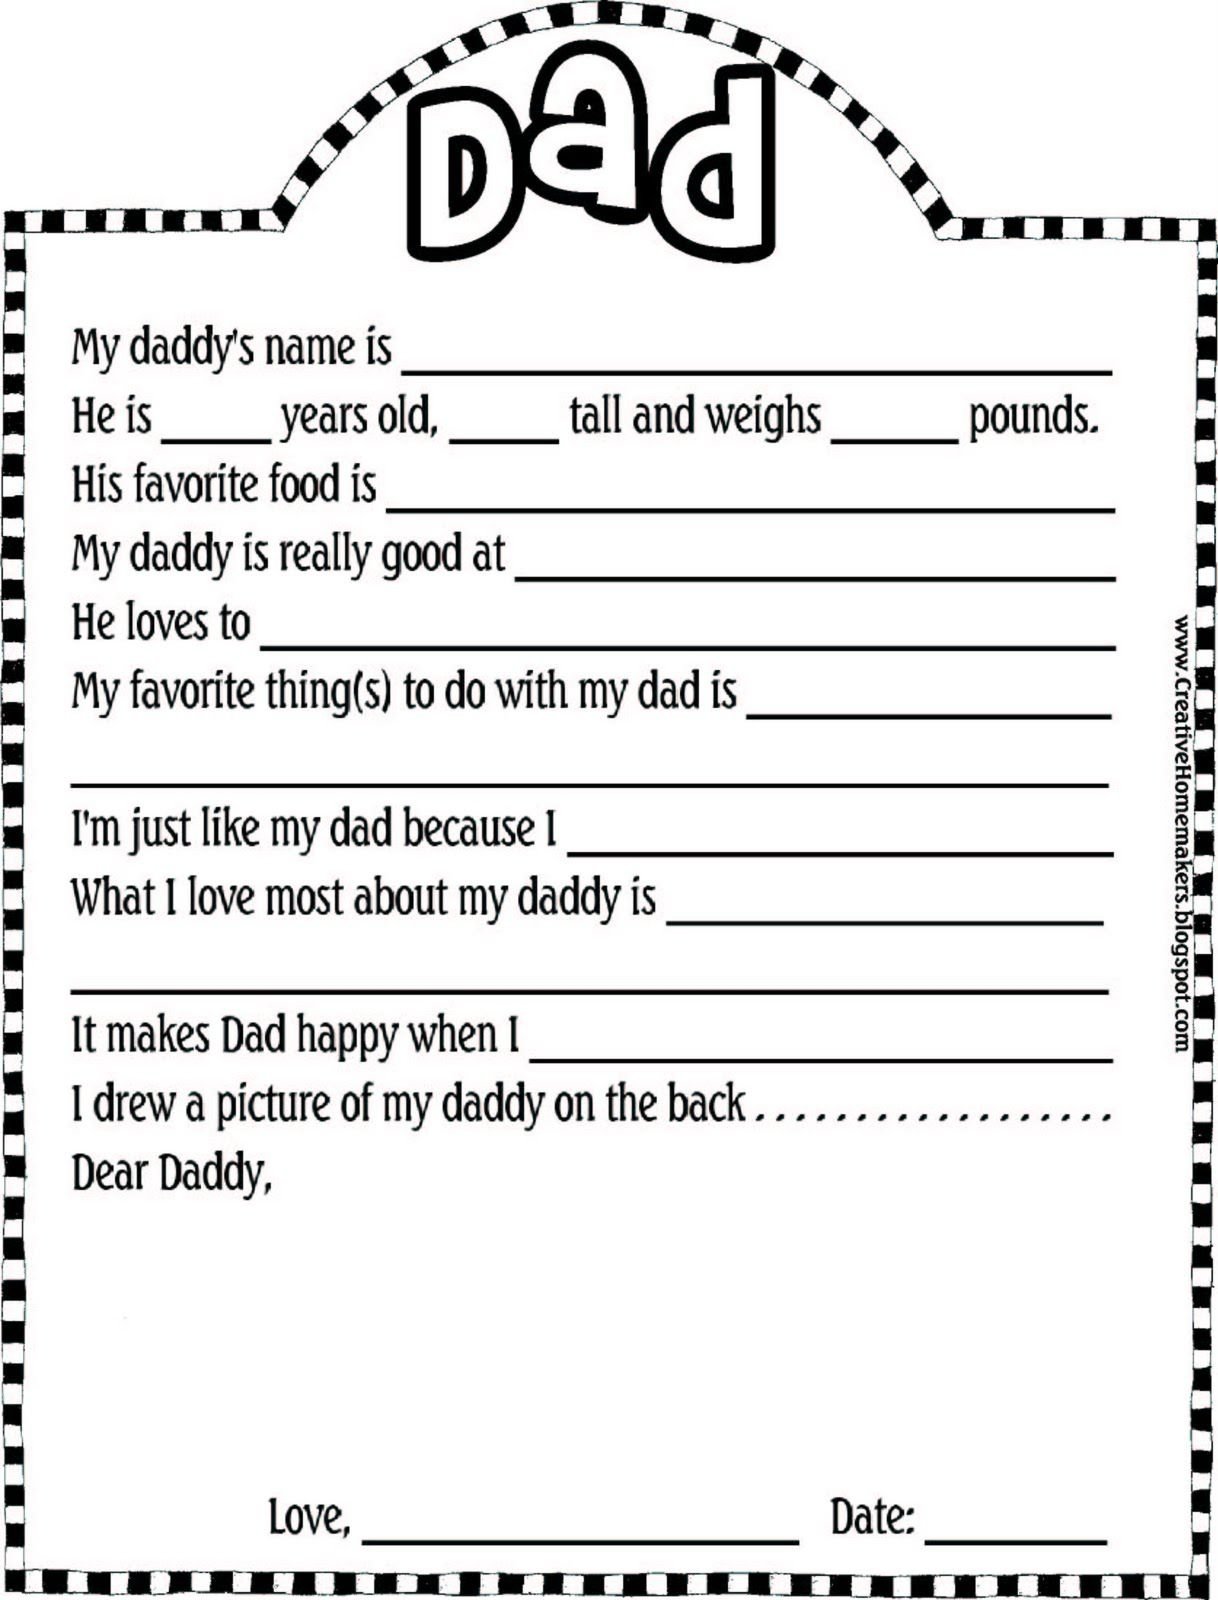 10 Wonderful Fathers Day Ideas For Kids free fathers day printable from the creative homemaker fathers 2022